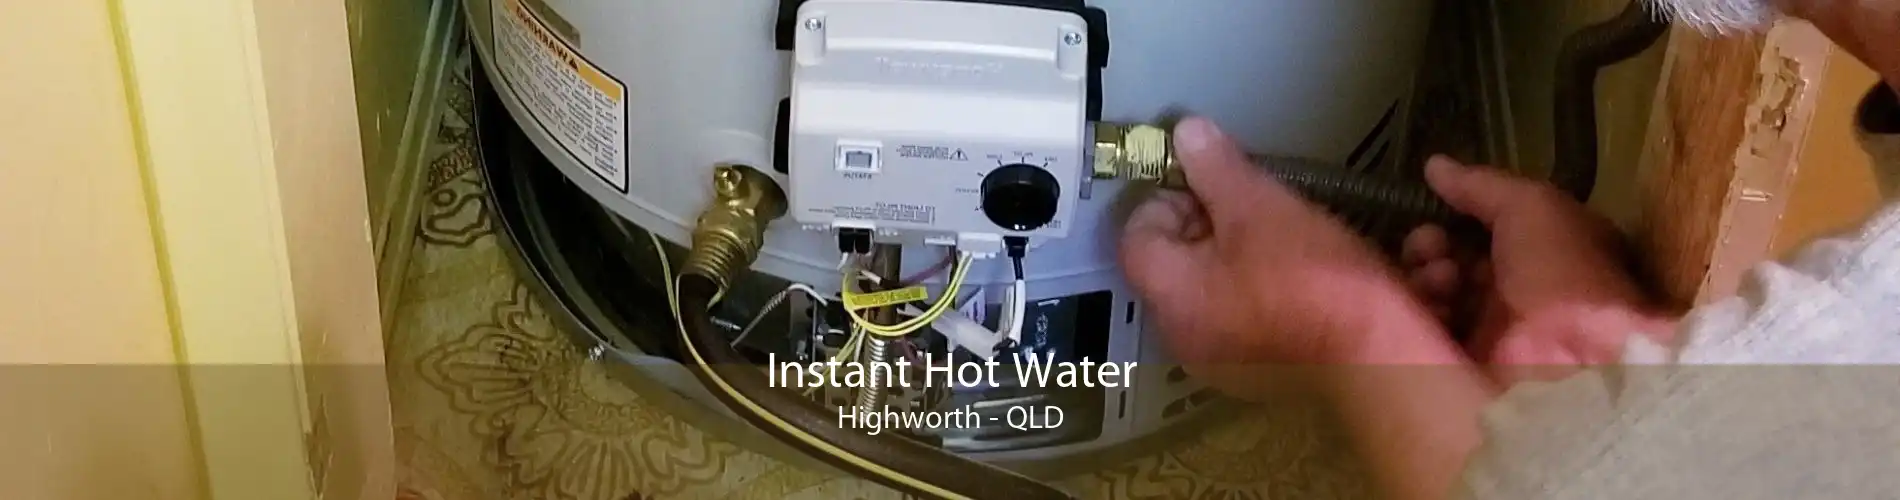 Instant Hot Water Highworth - QLD